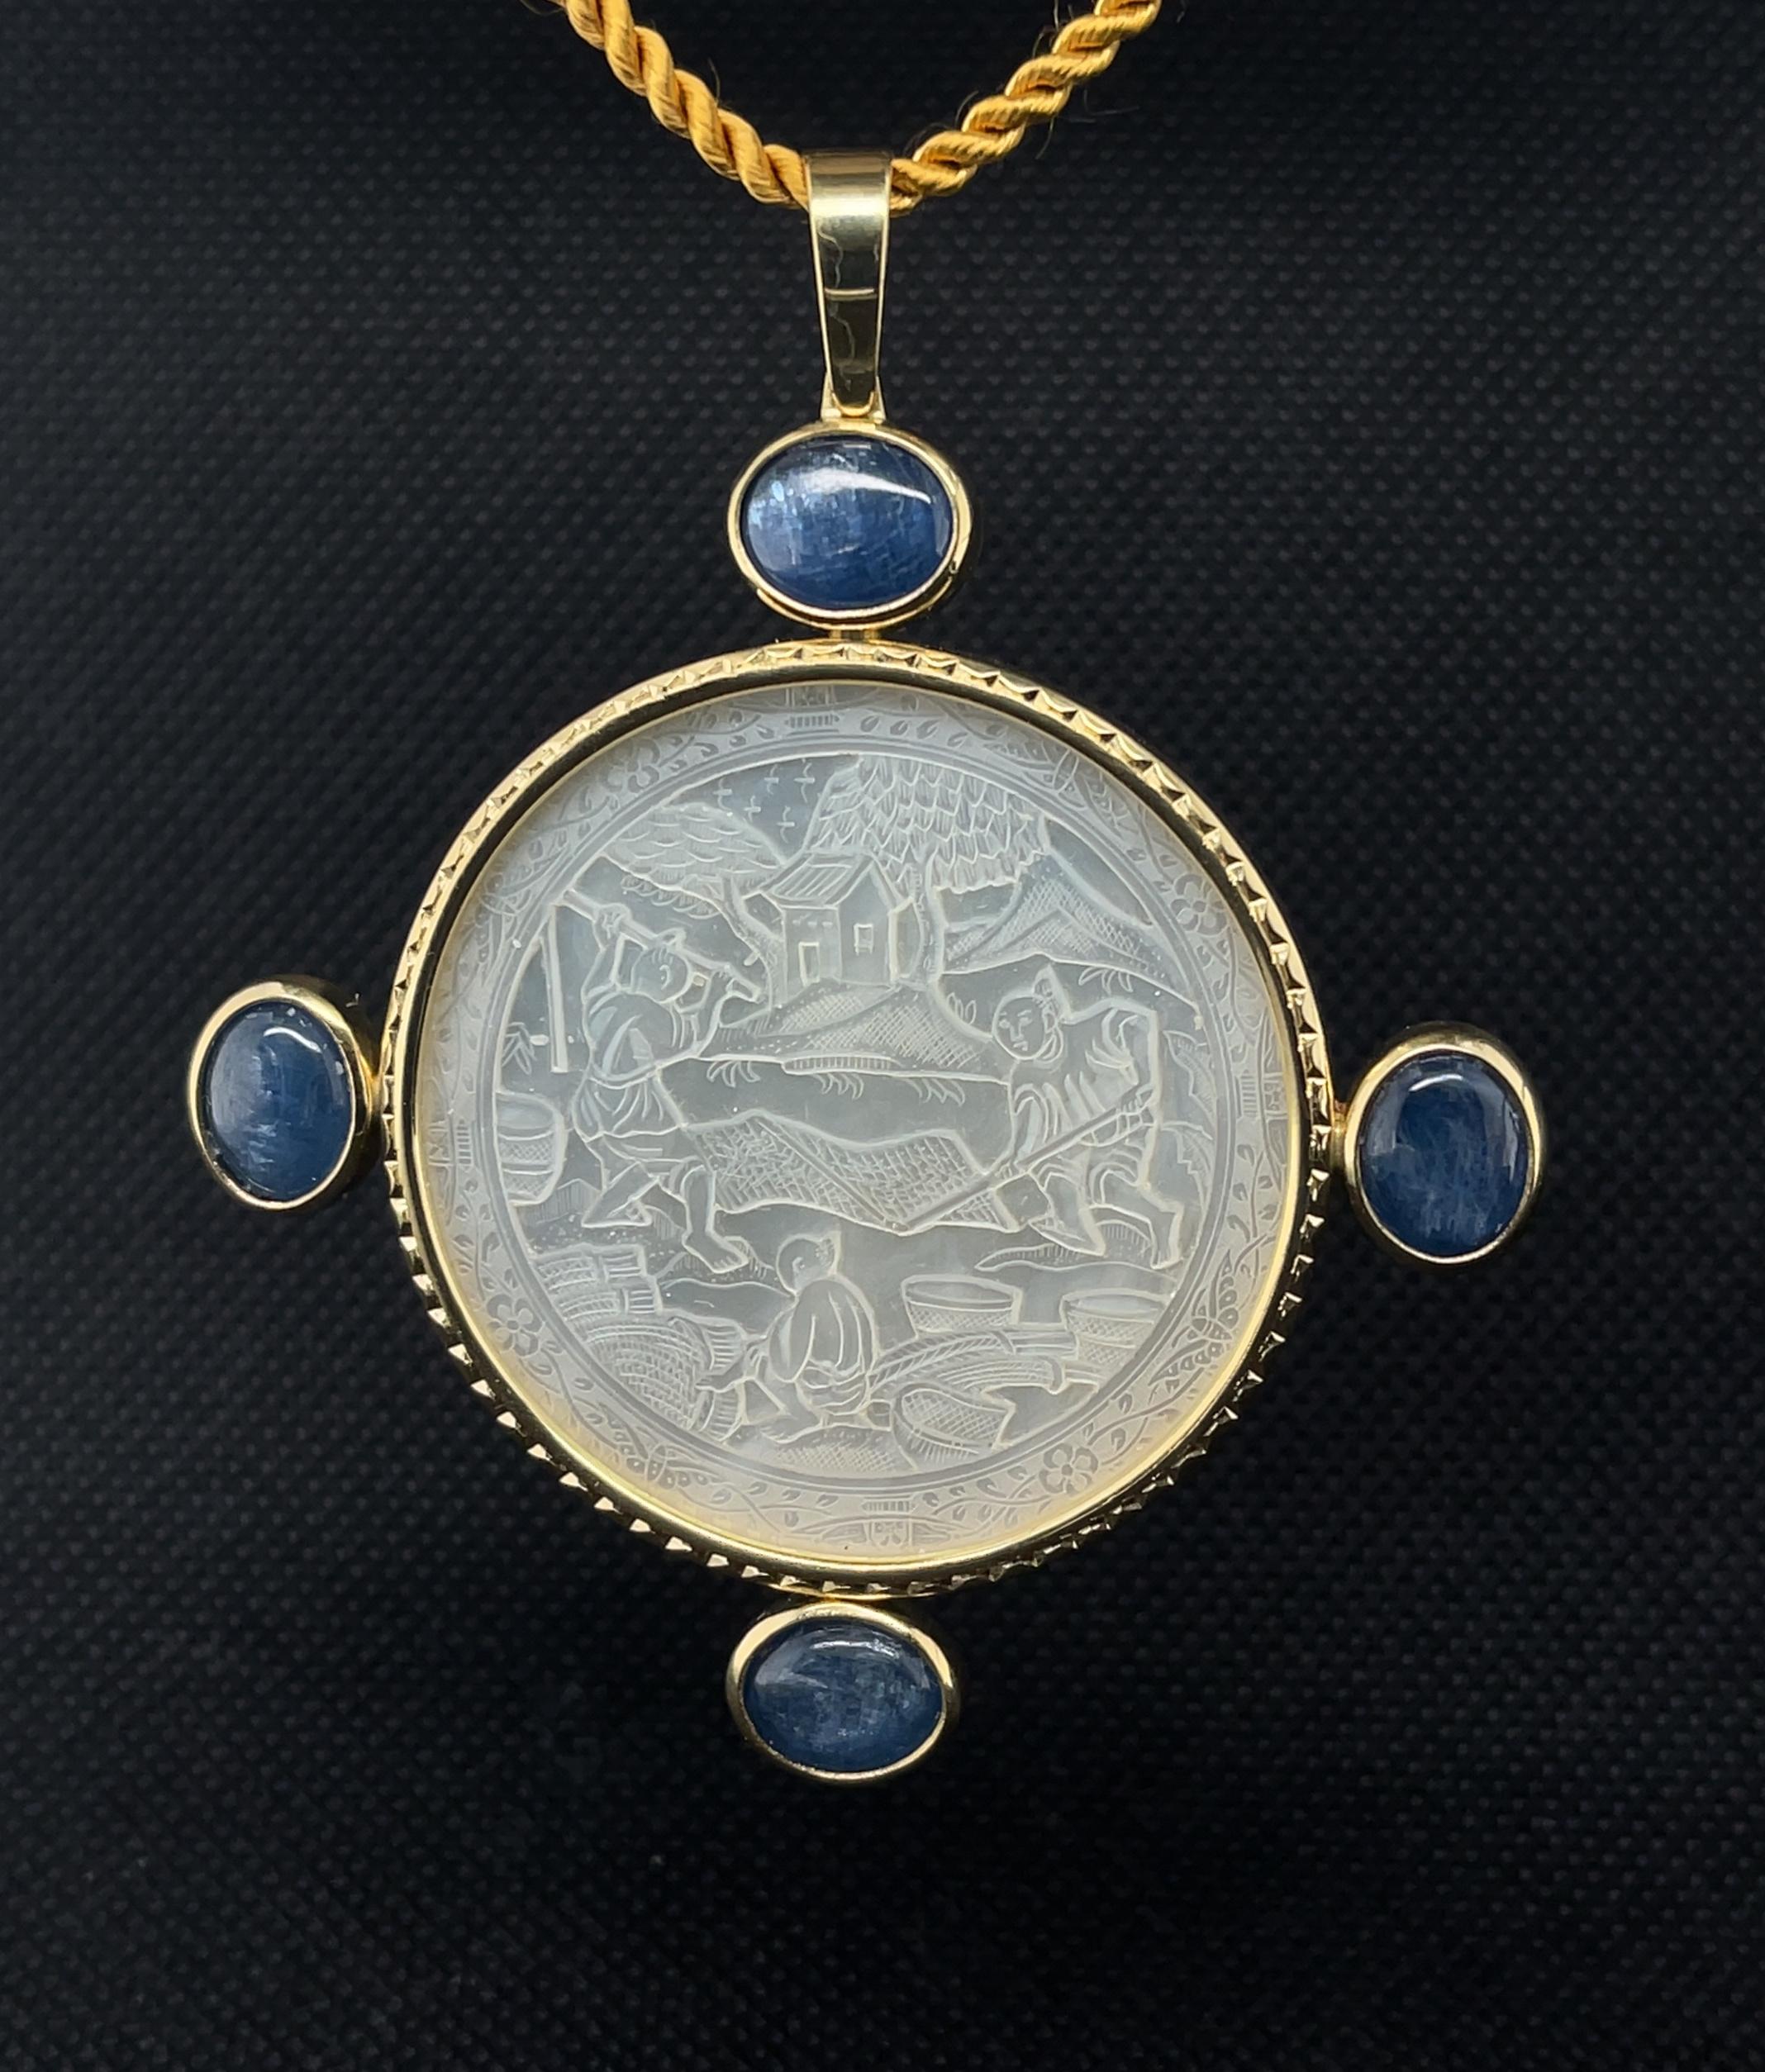 This eye-catching pendant features a true work of art - a beautiful, highly-carved antique gaming counter. Gaming counters, aka gambling chips, are beautiful pieces of fine quality mother-of-pearl that were hand carved in China in the 18th and 19th